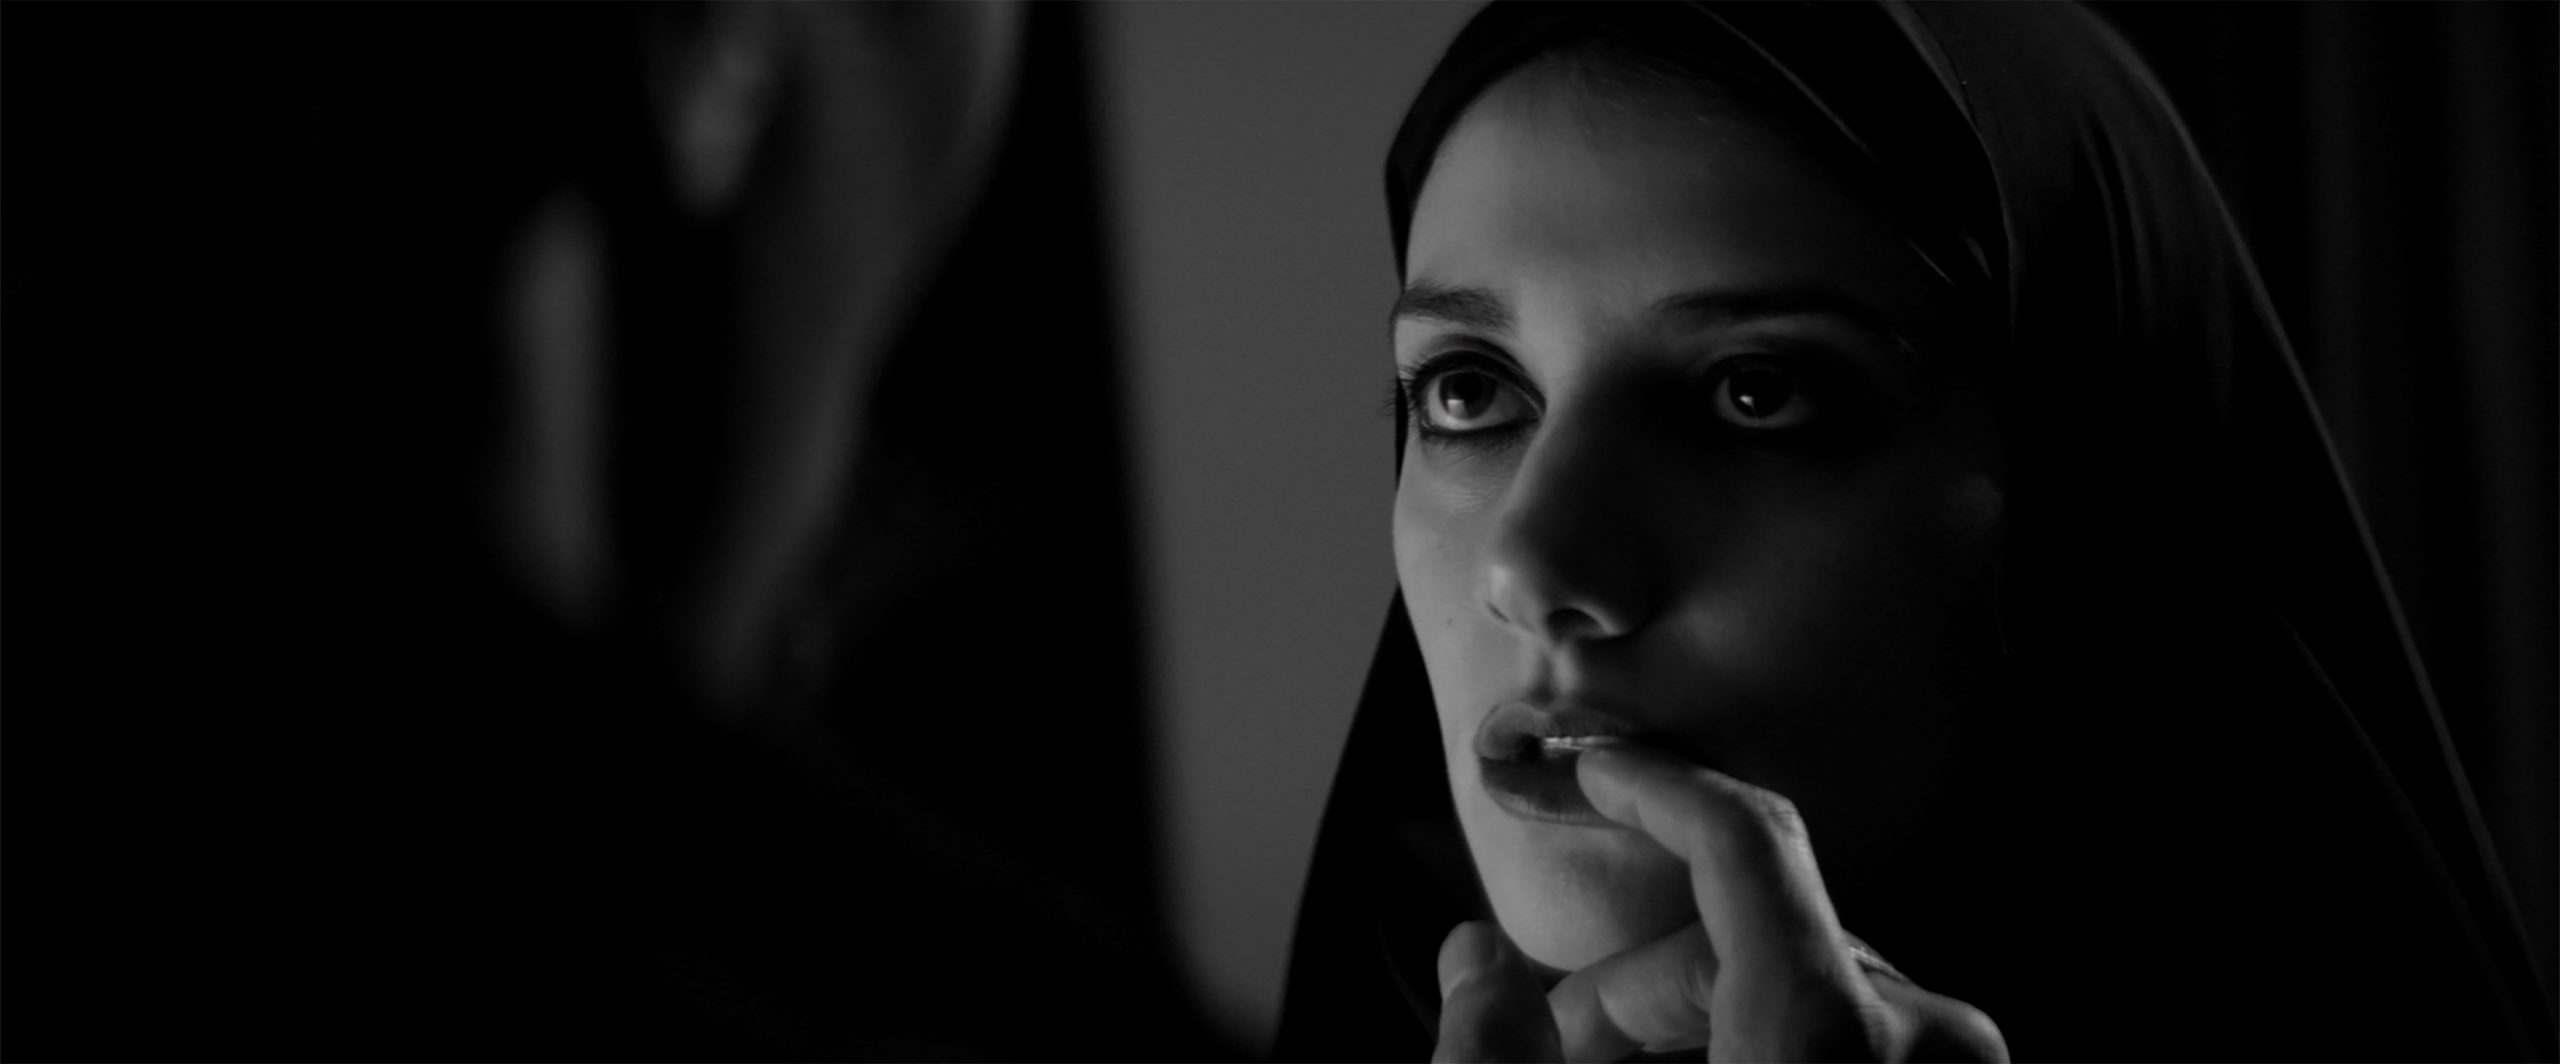 Featured image for “The Festival explores Ana Lily Amirpour’s world”